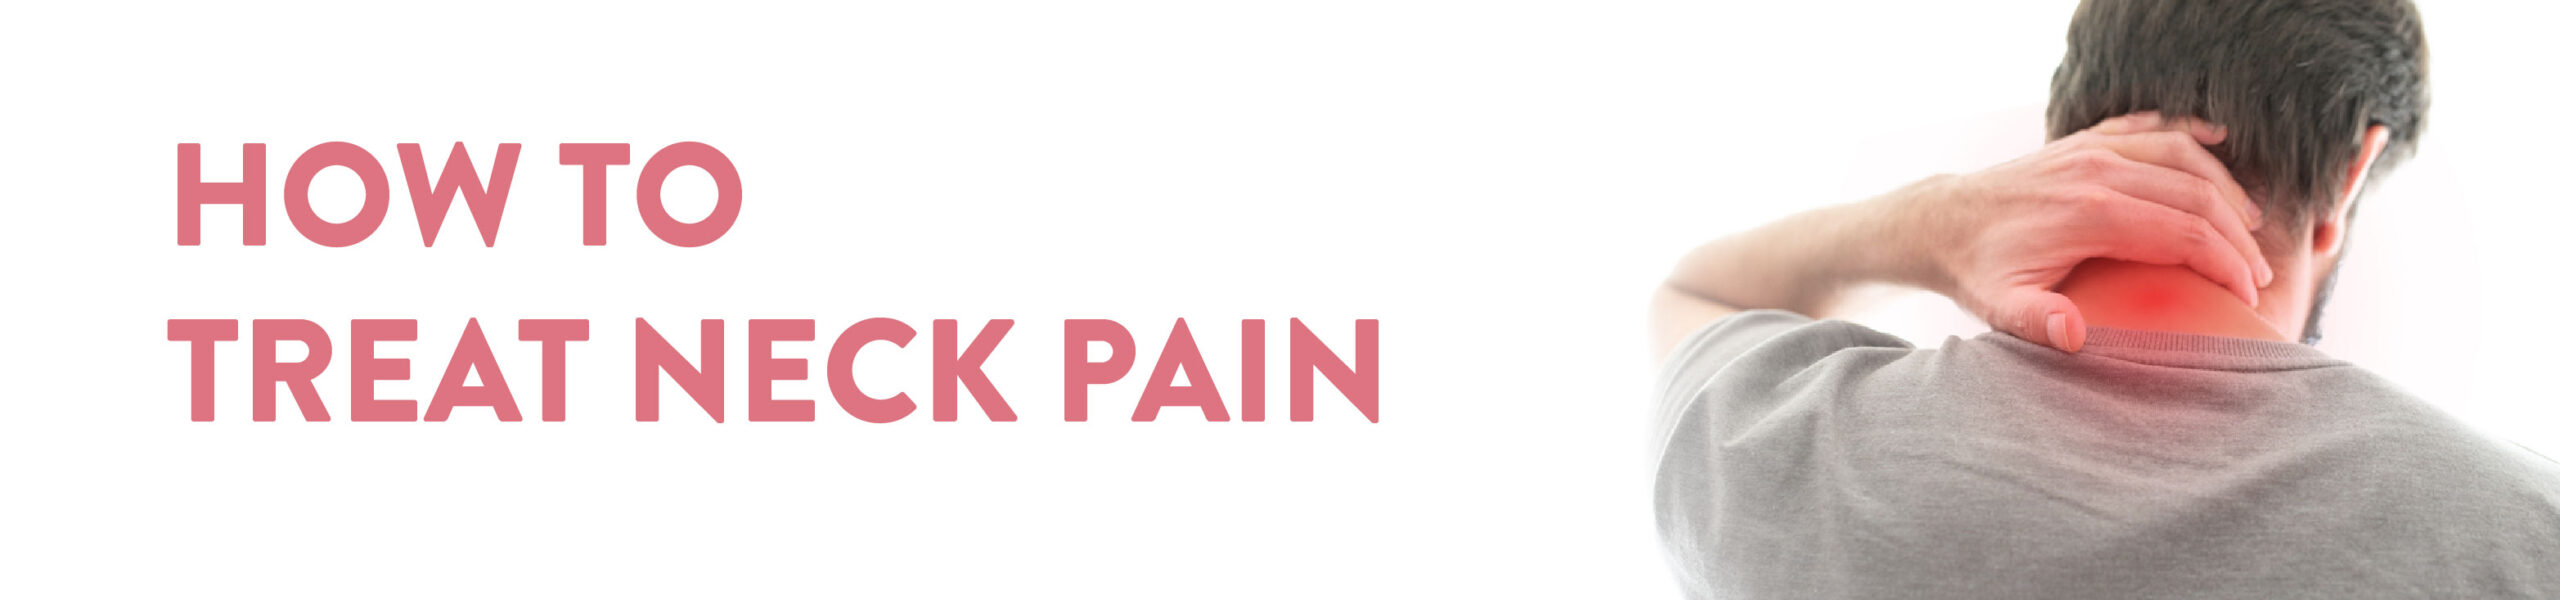 men with neck pain